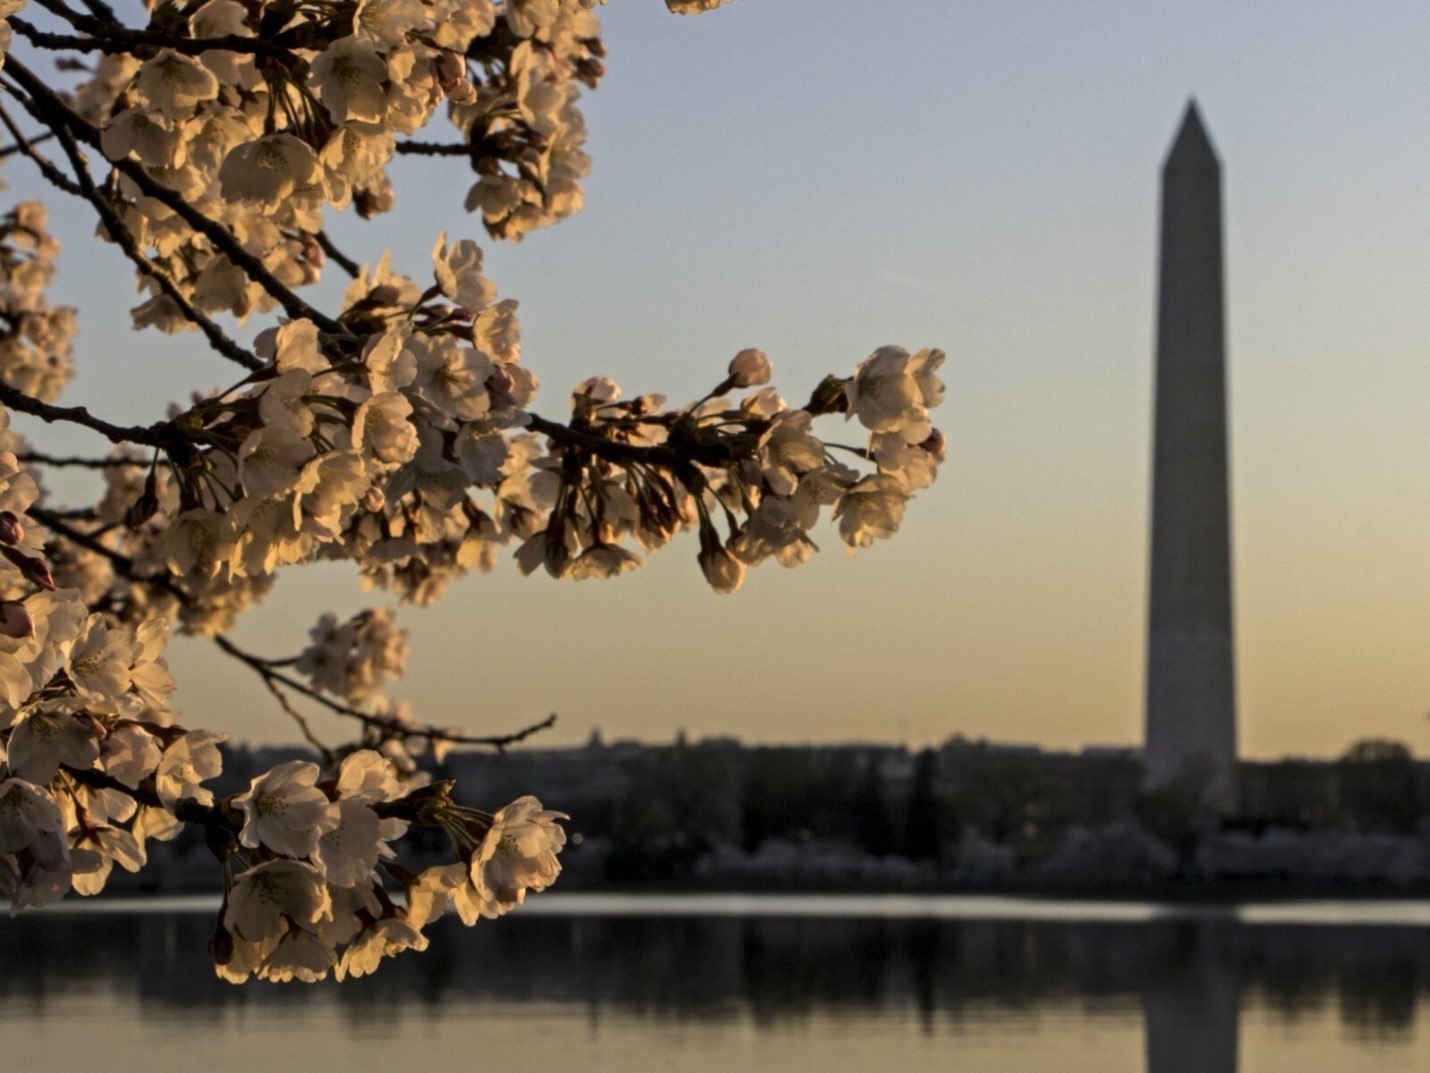 Closeup of cherry blossoms in low light with the Washington Monument in the background.